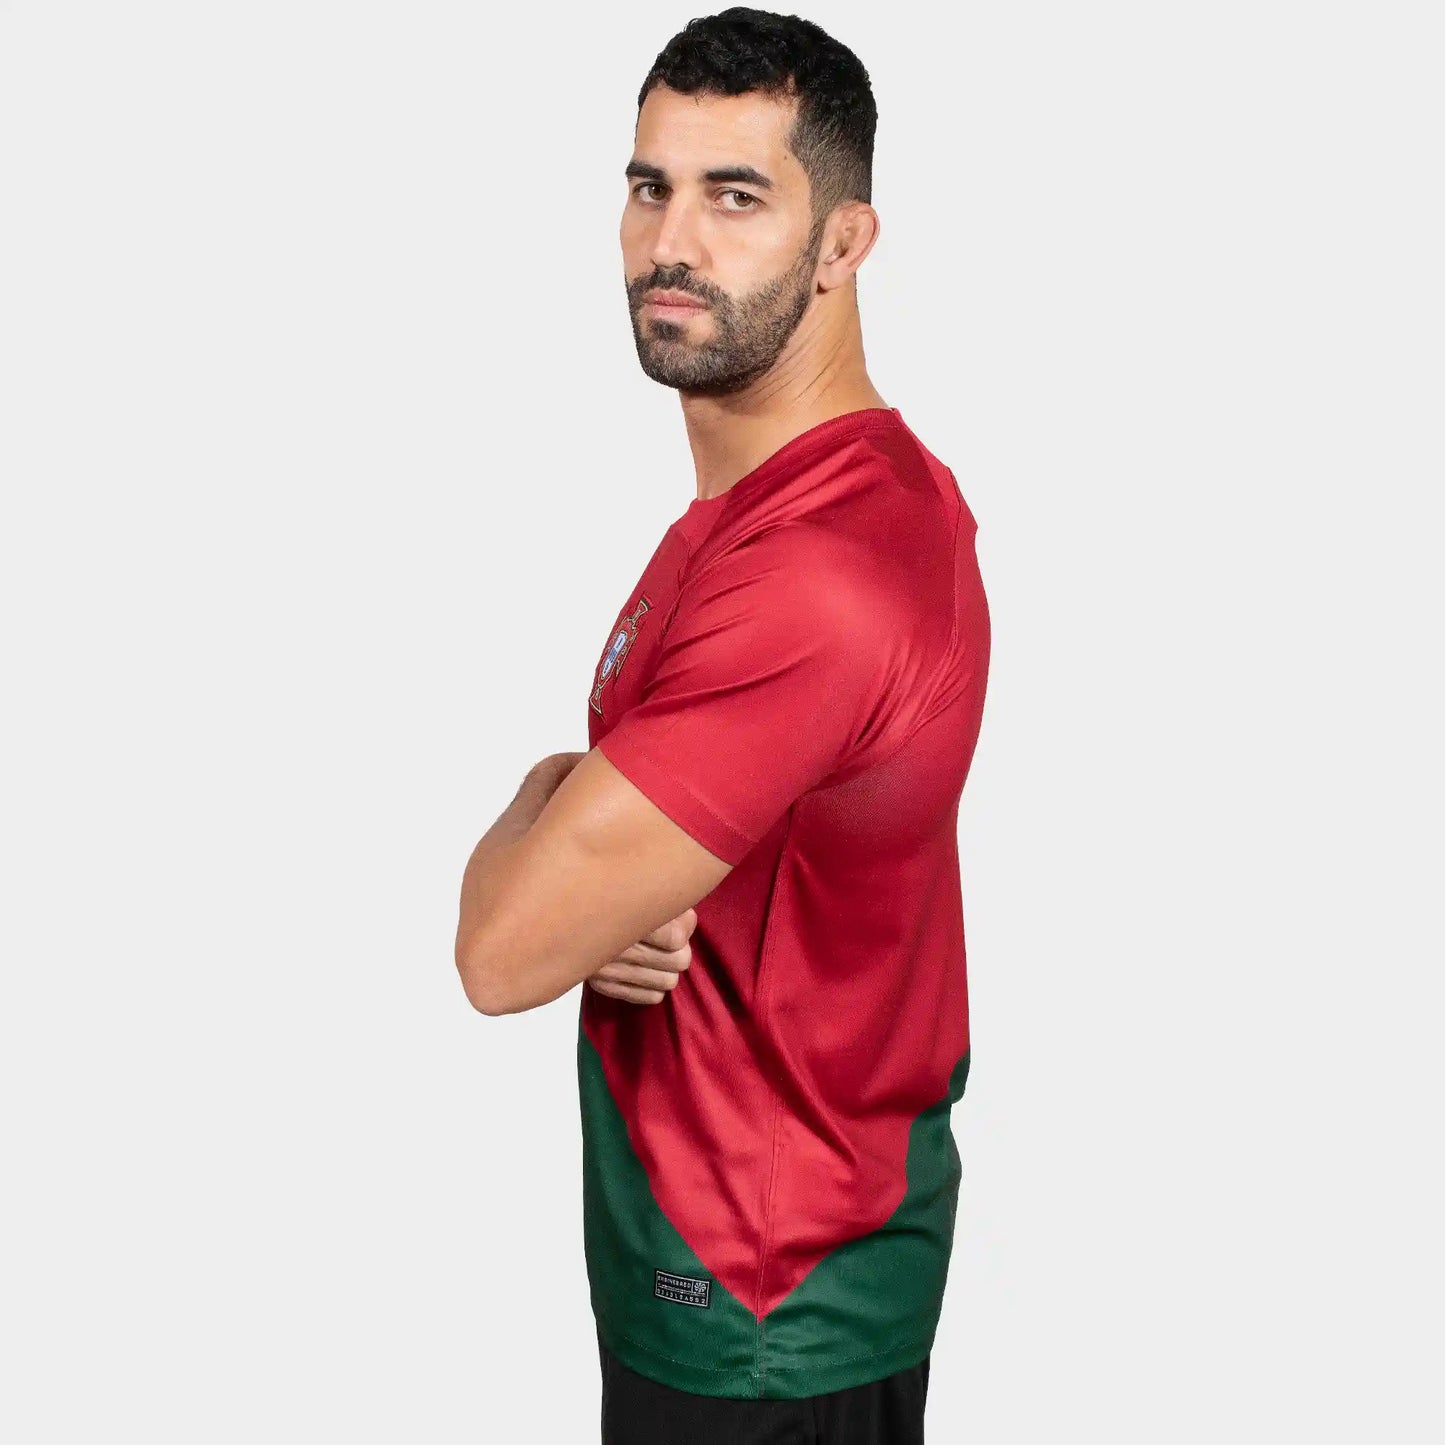 Portugal 22/23 Men Home Jersey